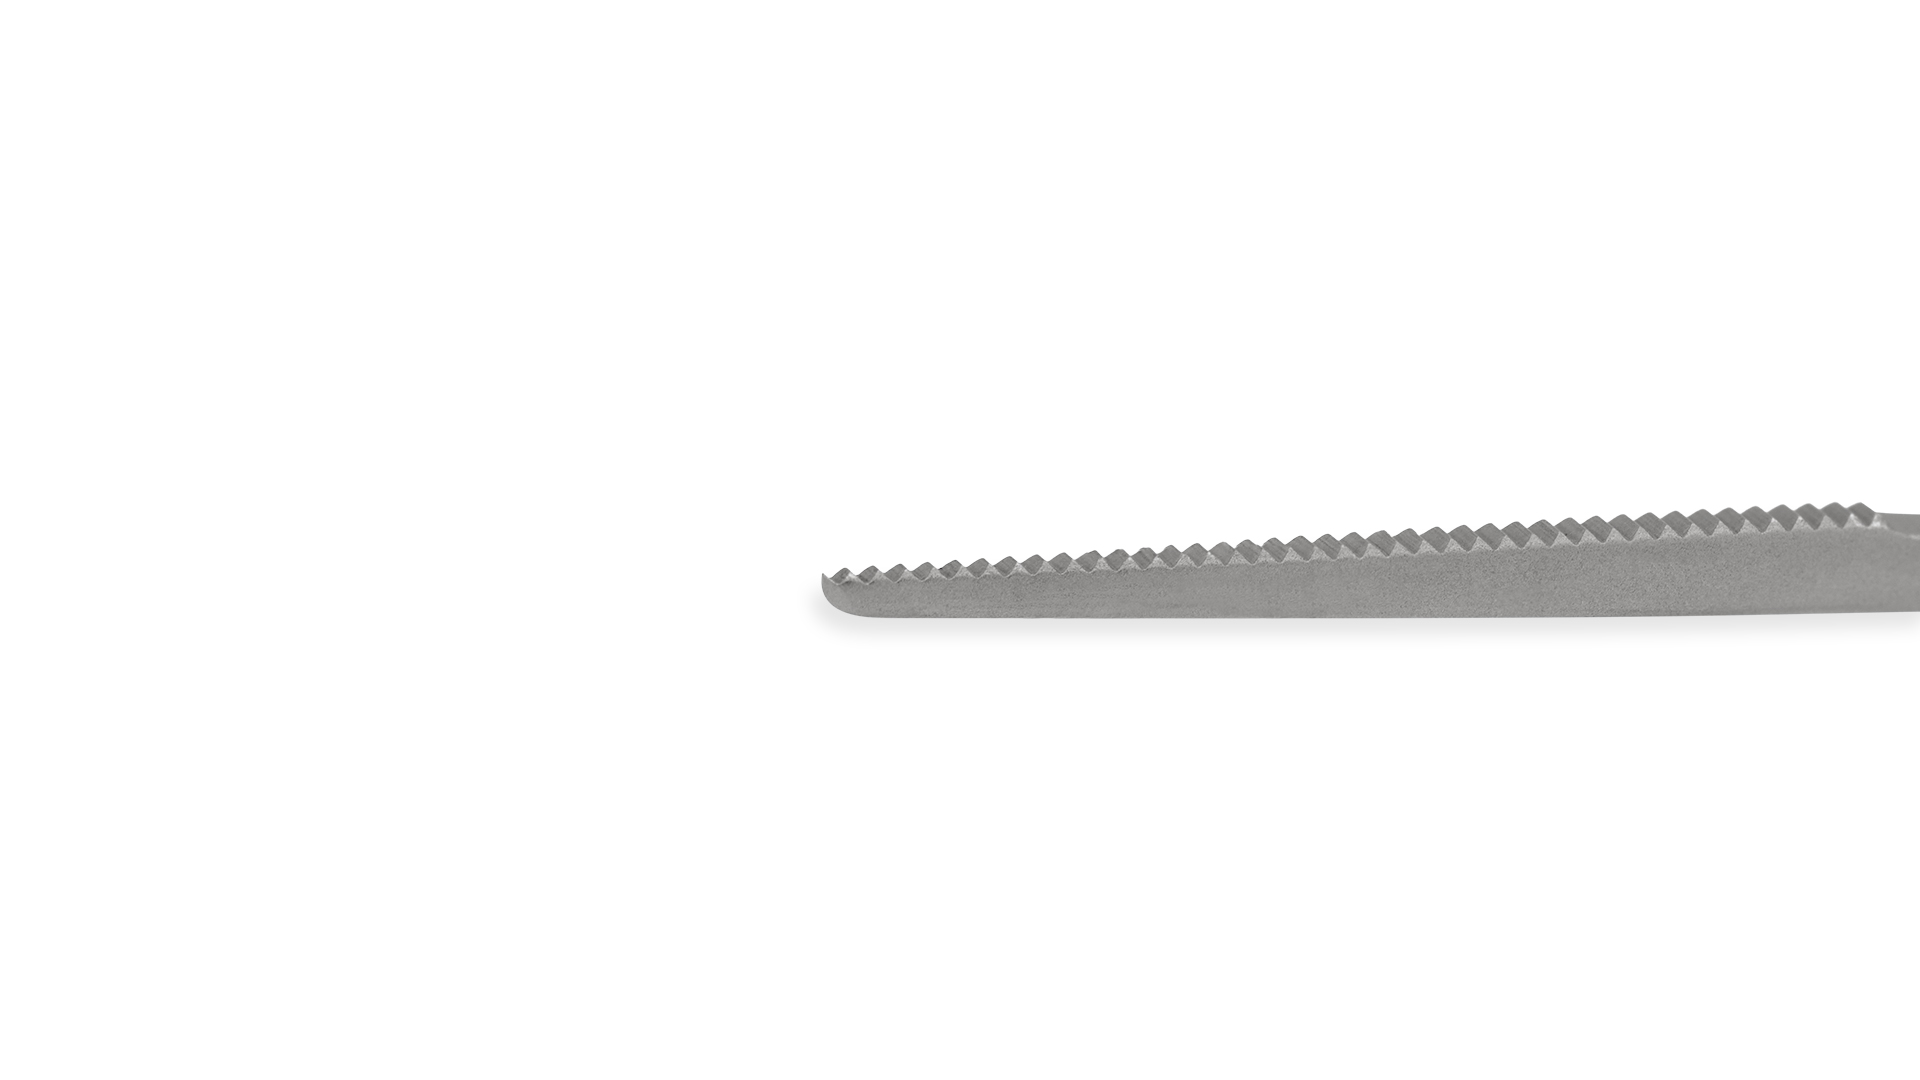 Gerald Forceps - Straight 0.7mm serrated tips